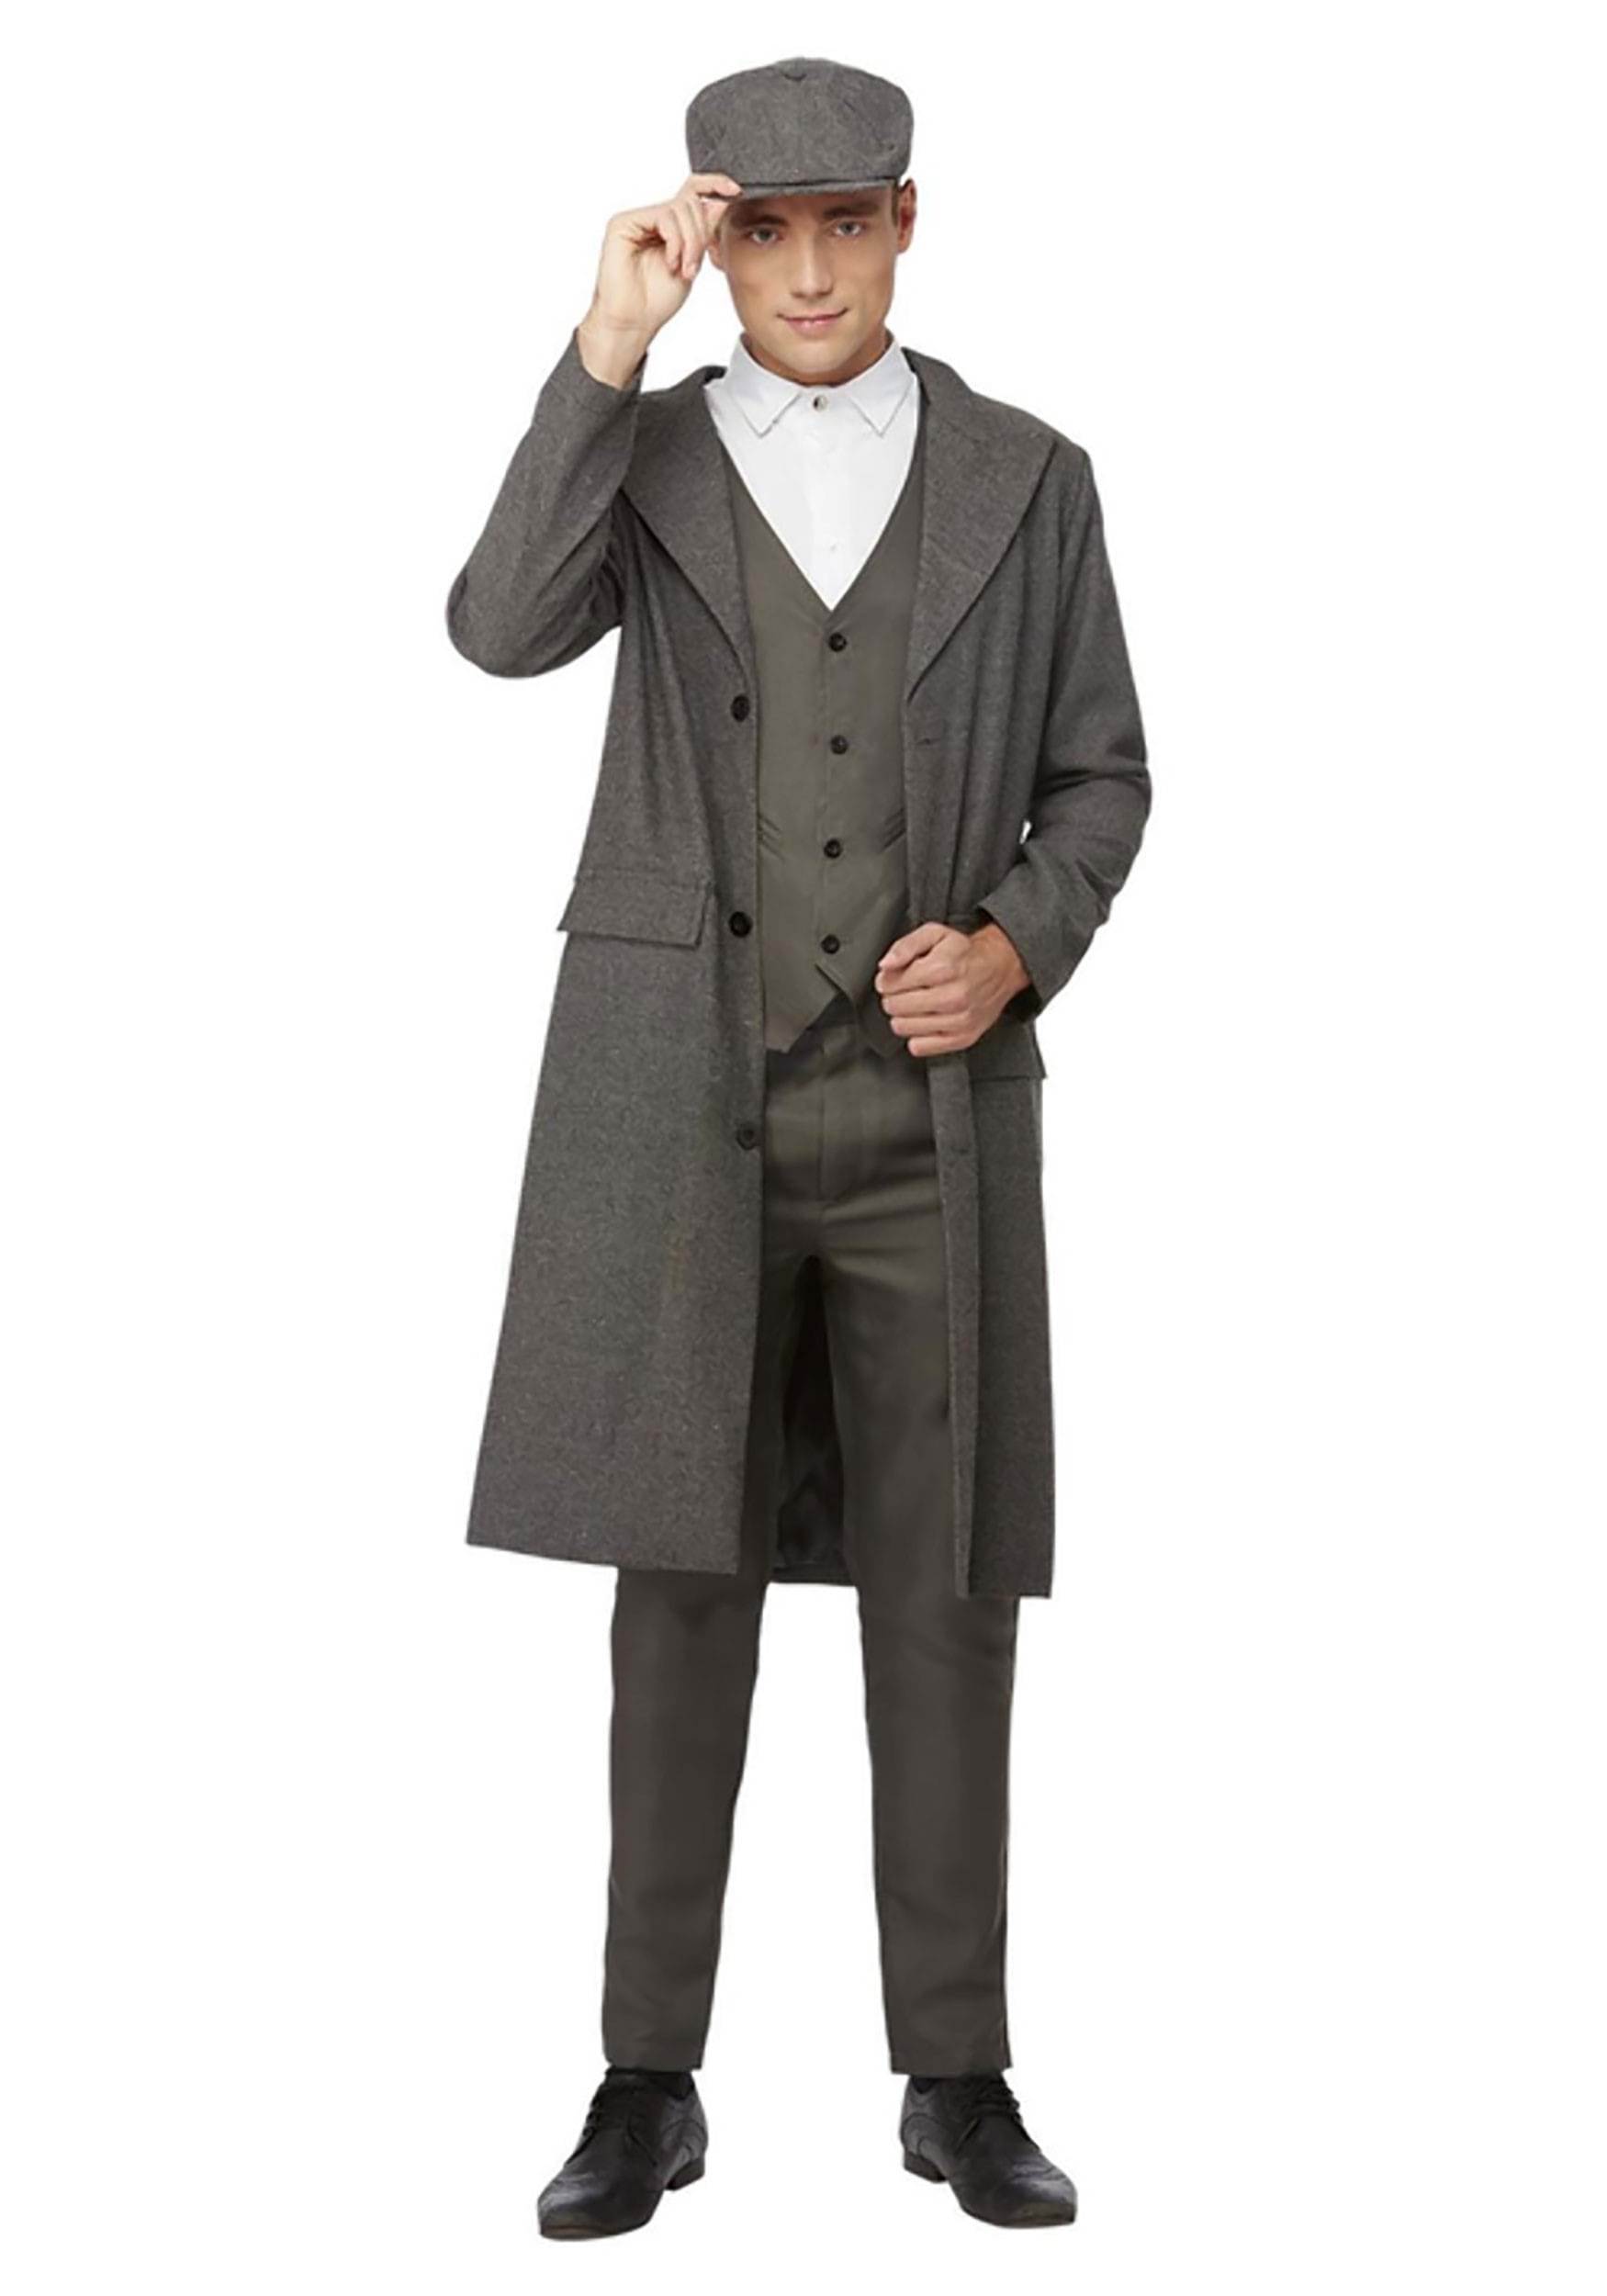 Image of Adult Peaky Blinders Thomas Shelby Costume | TV Show Costumes ID SM51669-M